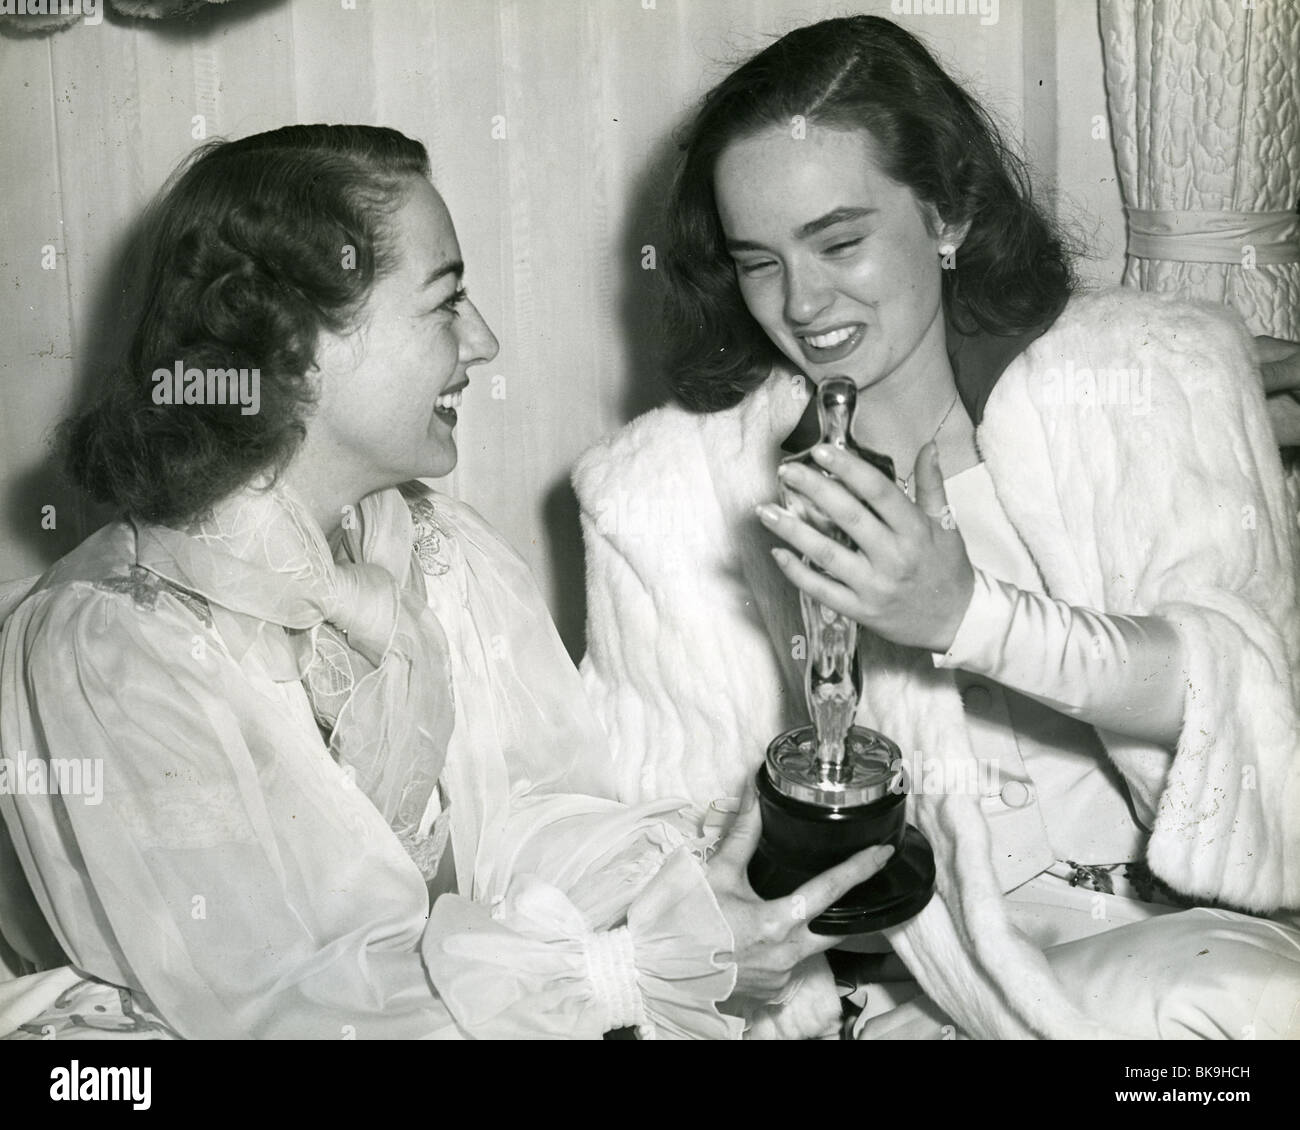 JOAN CRAWFORD at left with her Oscar for "Mildred Pierce" in 1945 shares her delight with Ann Blyth who won Best Supporting Actress in the same film. Crawford was still in bed having been too ill to attend the Oscar ceremony. Stock Photo